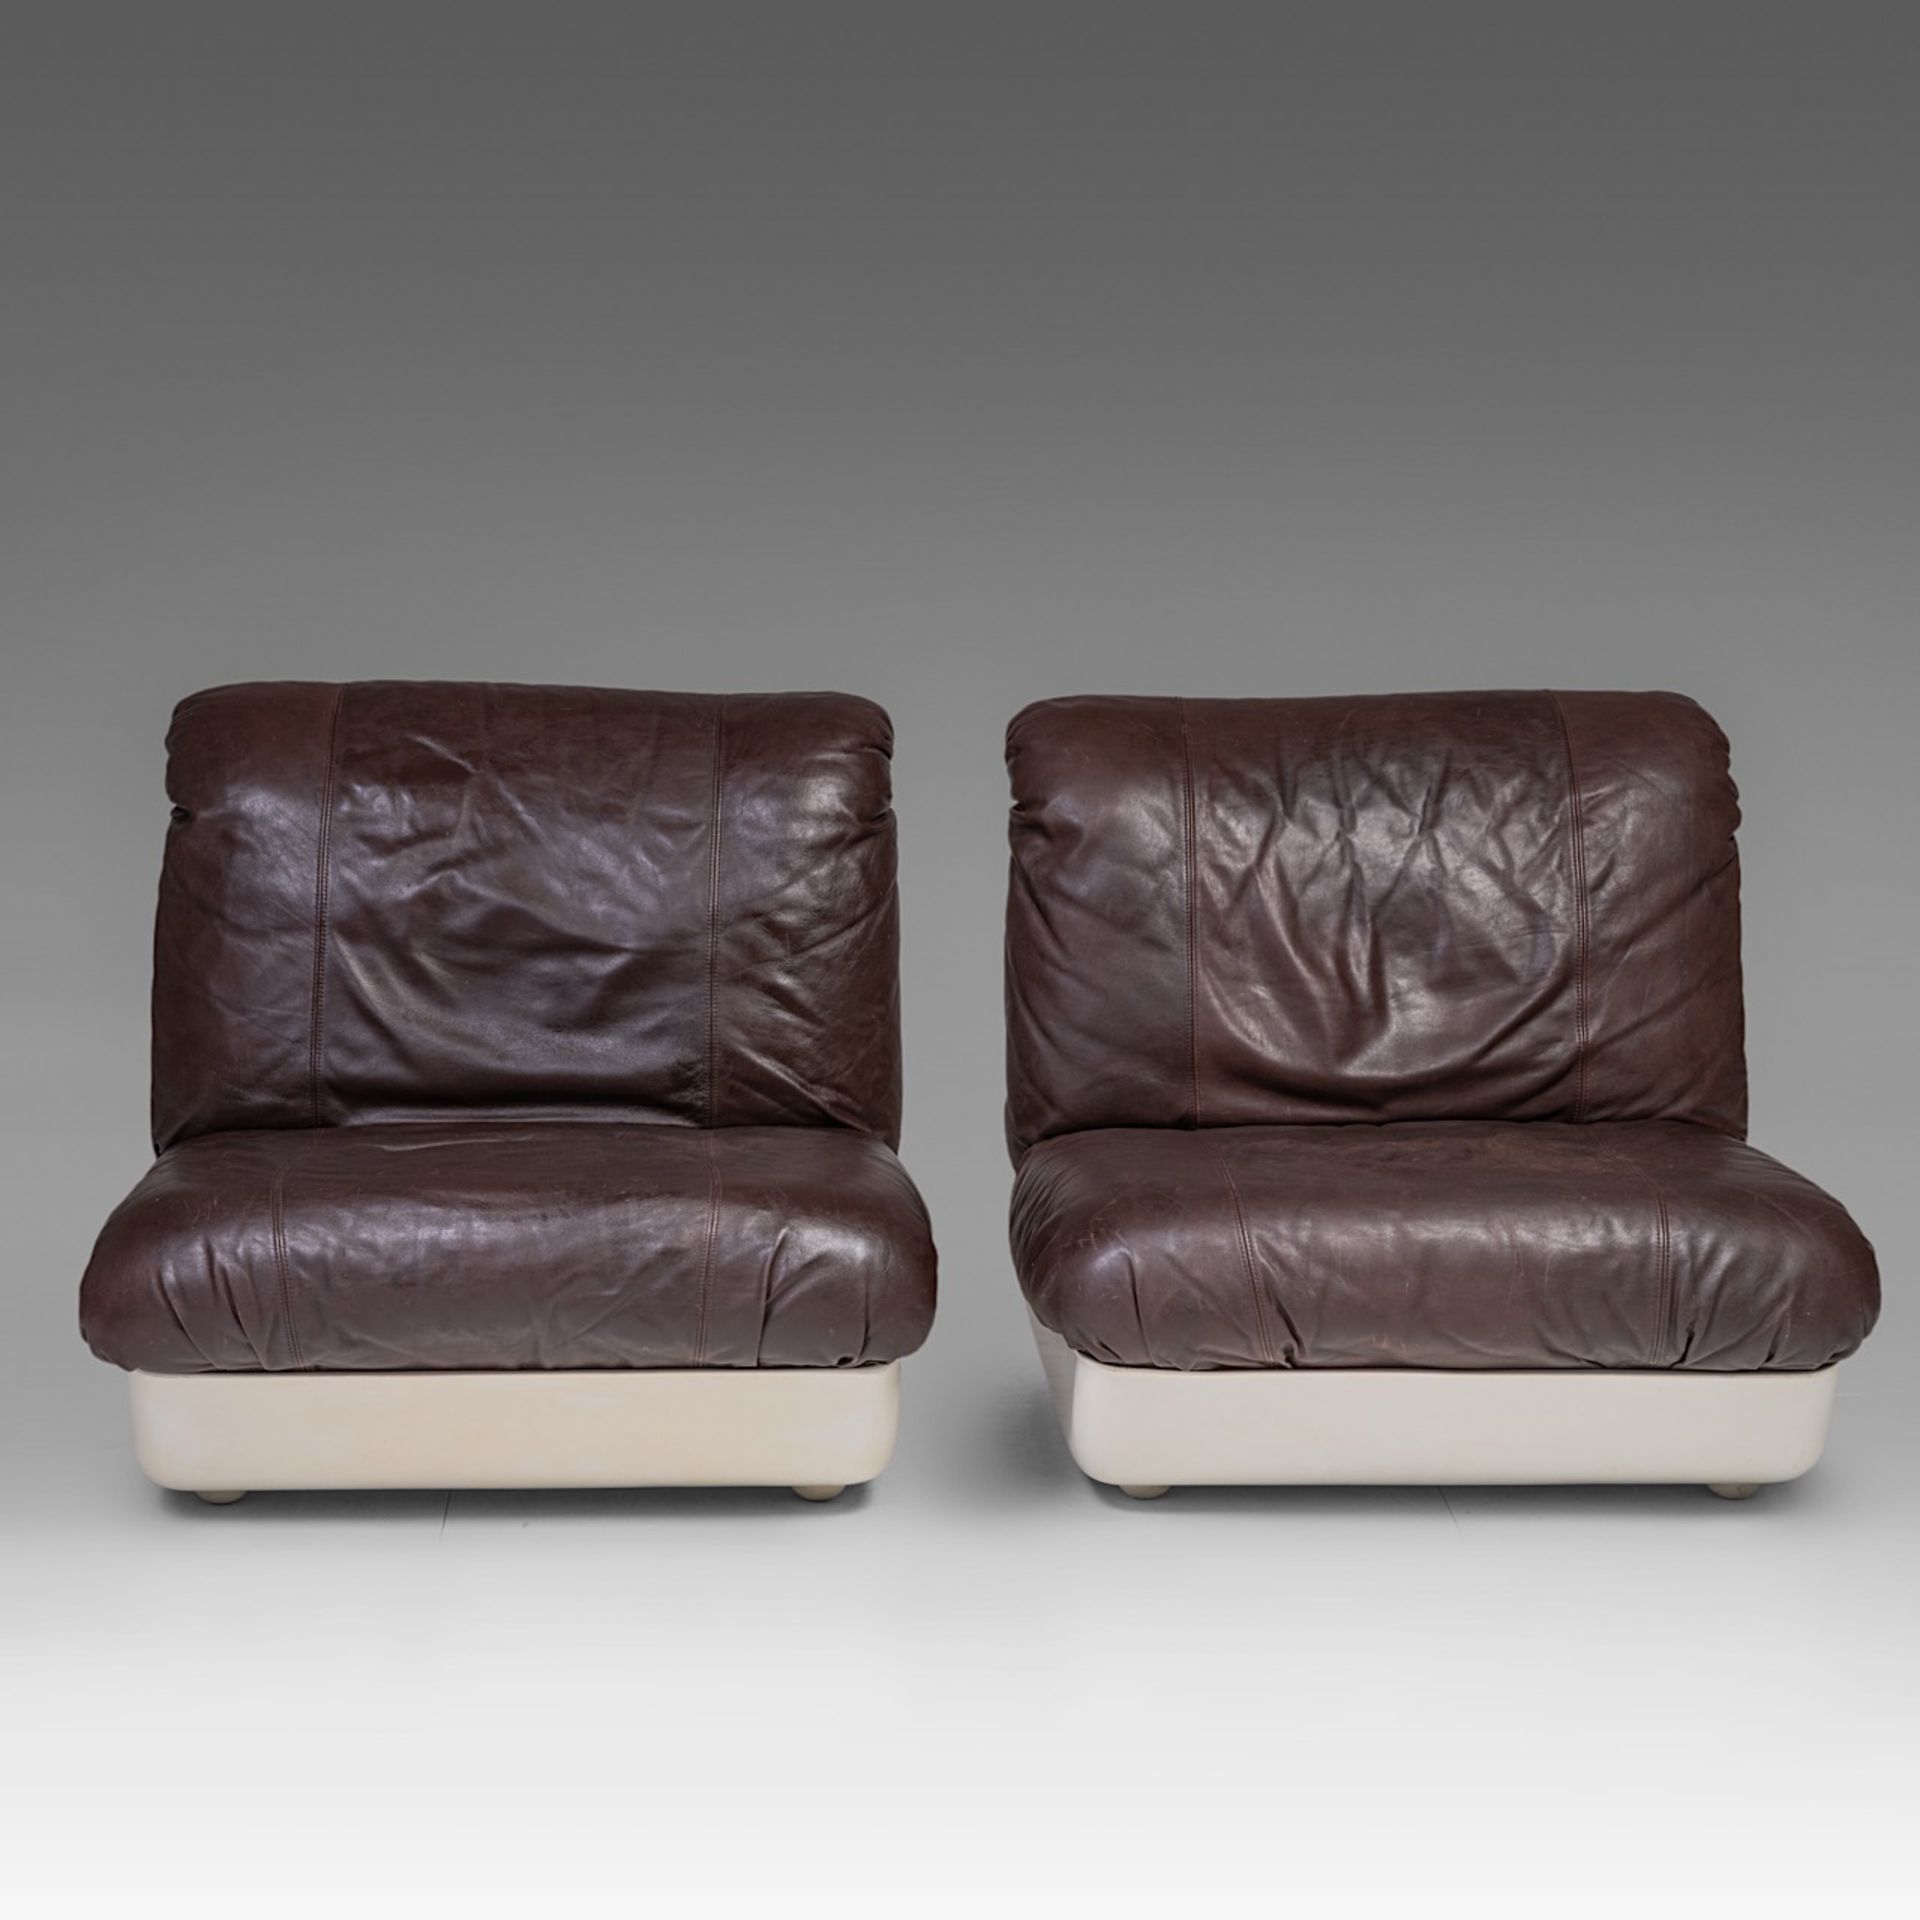 A vintage pair of loacoda chairs by Waldmann, Golz en Schmidt, made by Durlet, Belgium 1972, H 73 - - Image 4 of 12